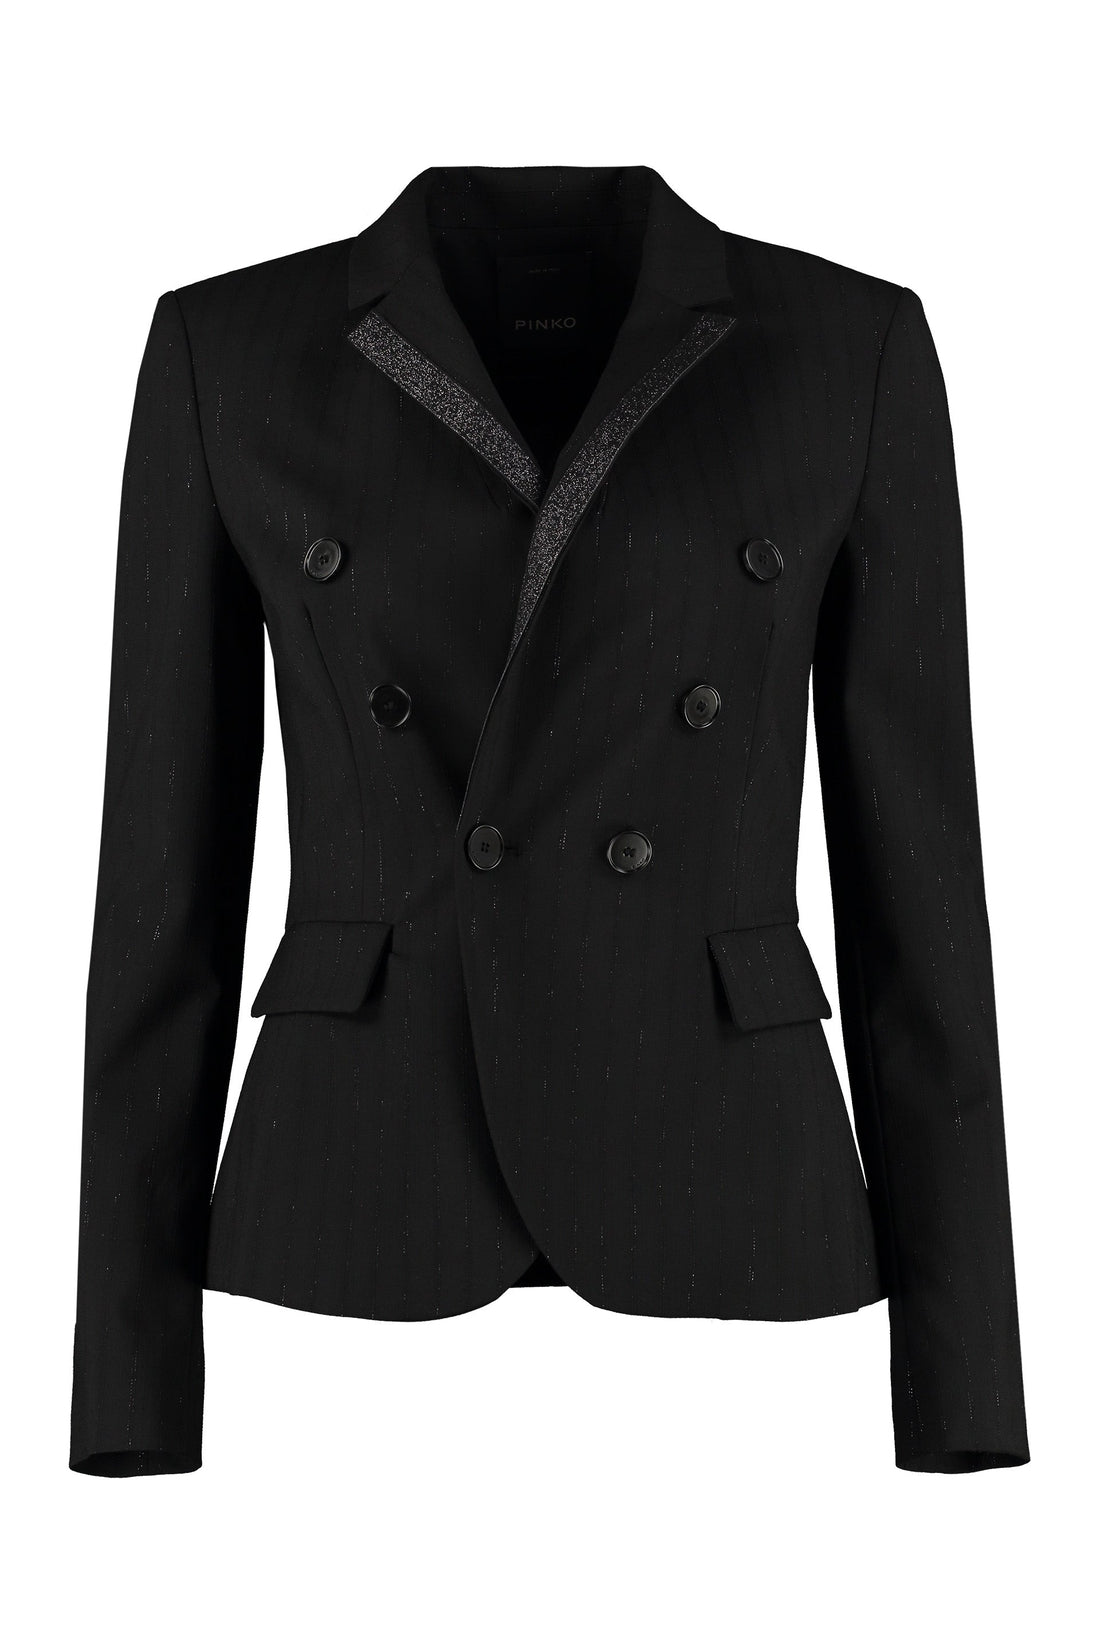 Pinko-OUTLET-SALE-Sfogliare double-breasted jacket-ARCHIVIST